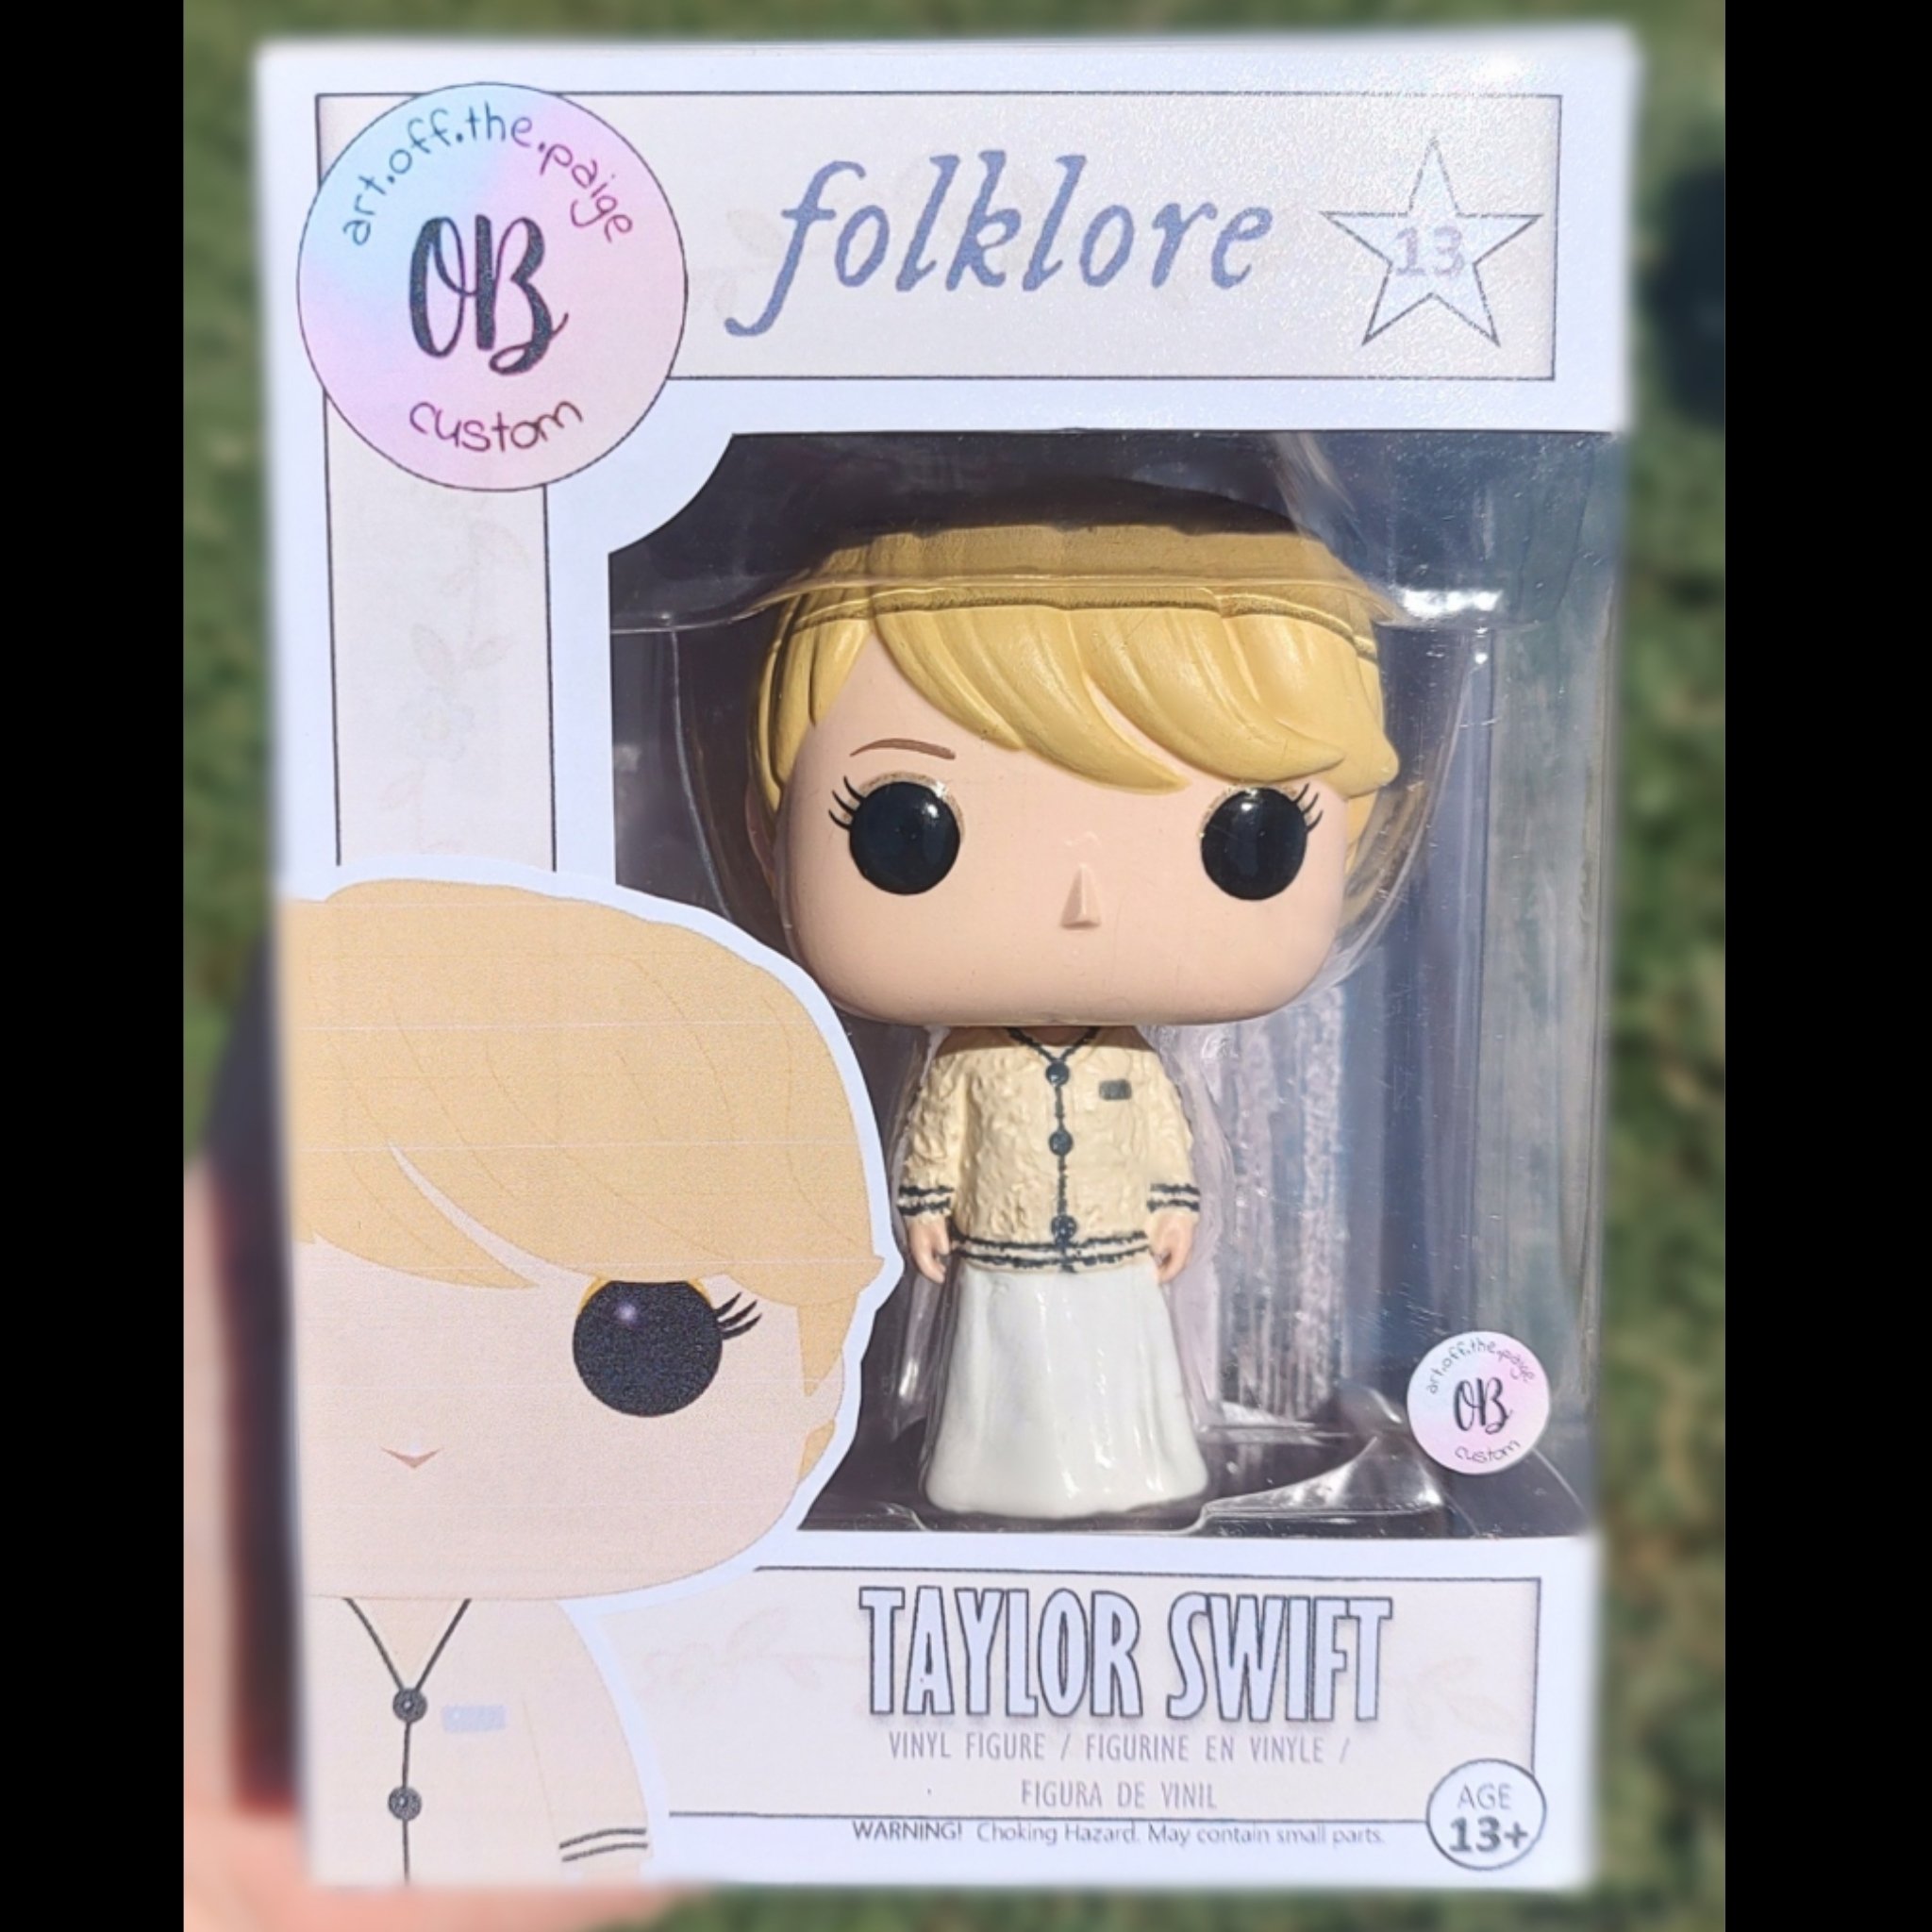 art.off.the.paige / Olivia on X: Taylor Swift Custom Funko Pop Grayscale  Folklore 🤍 #taylor #swift #taylorswift #folklore #folklorealbum  #folkloretaylorswift #evermore #fearless #cardigan #taylornation #custom  #customfunkopop #funkopop #funko #pop